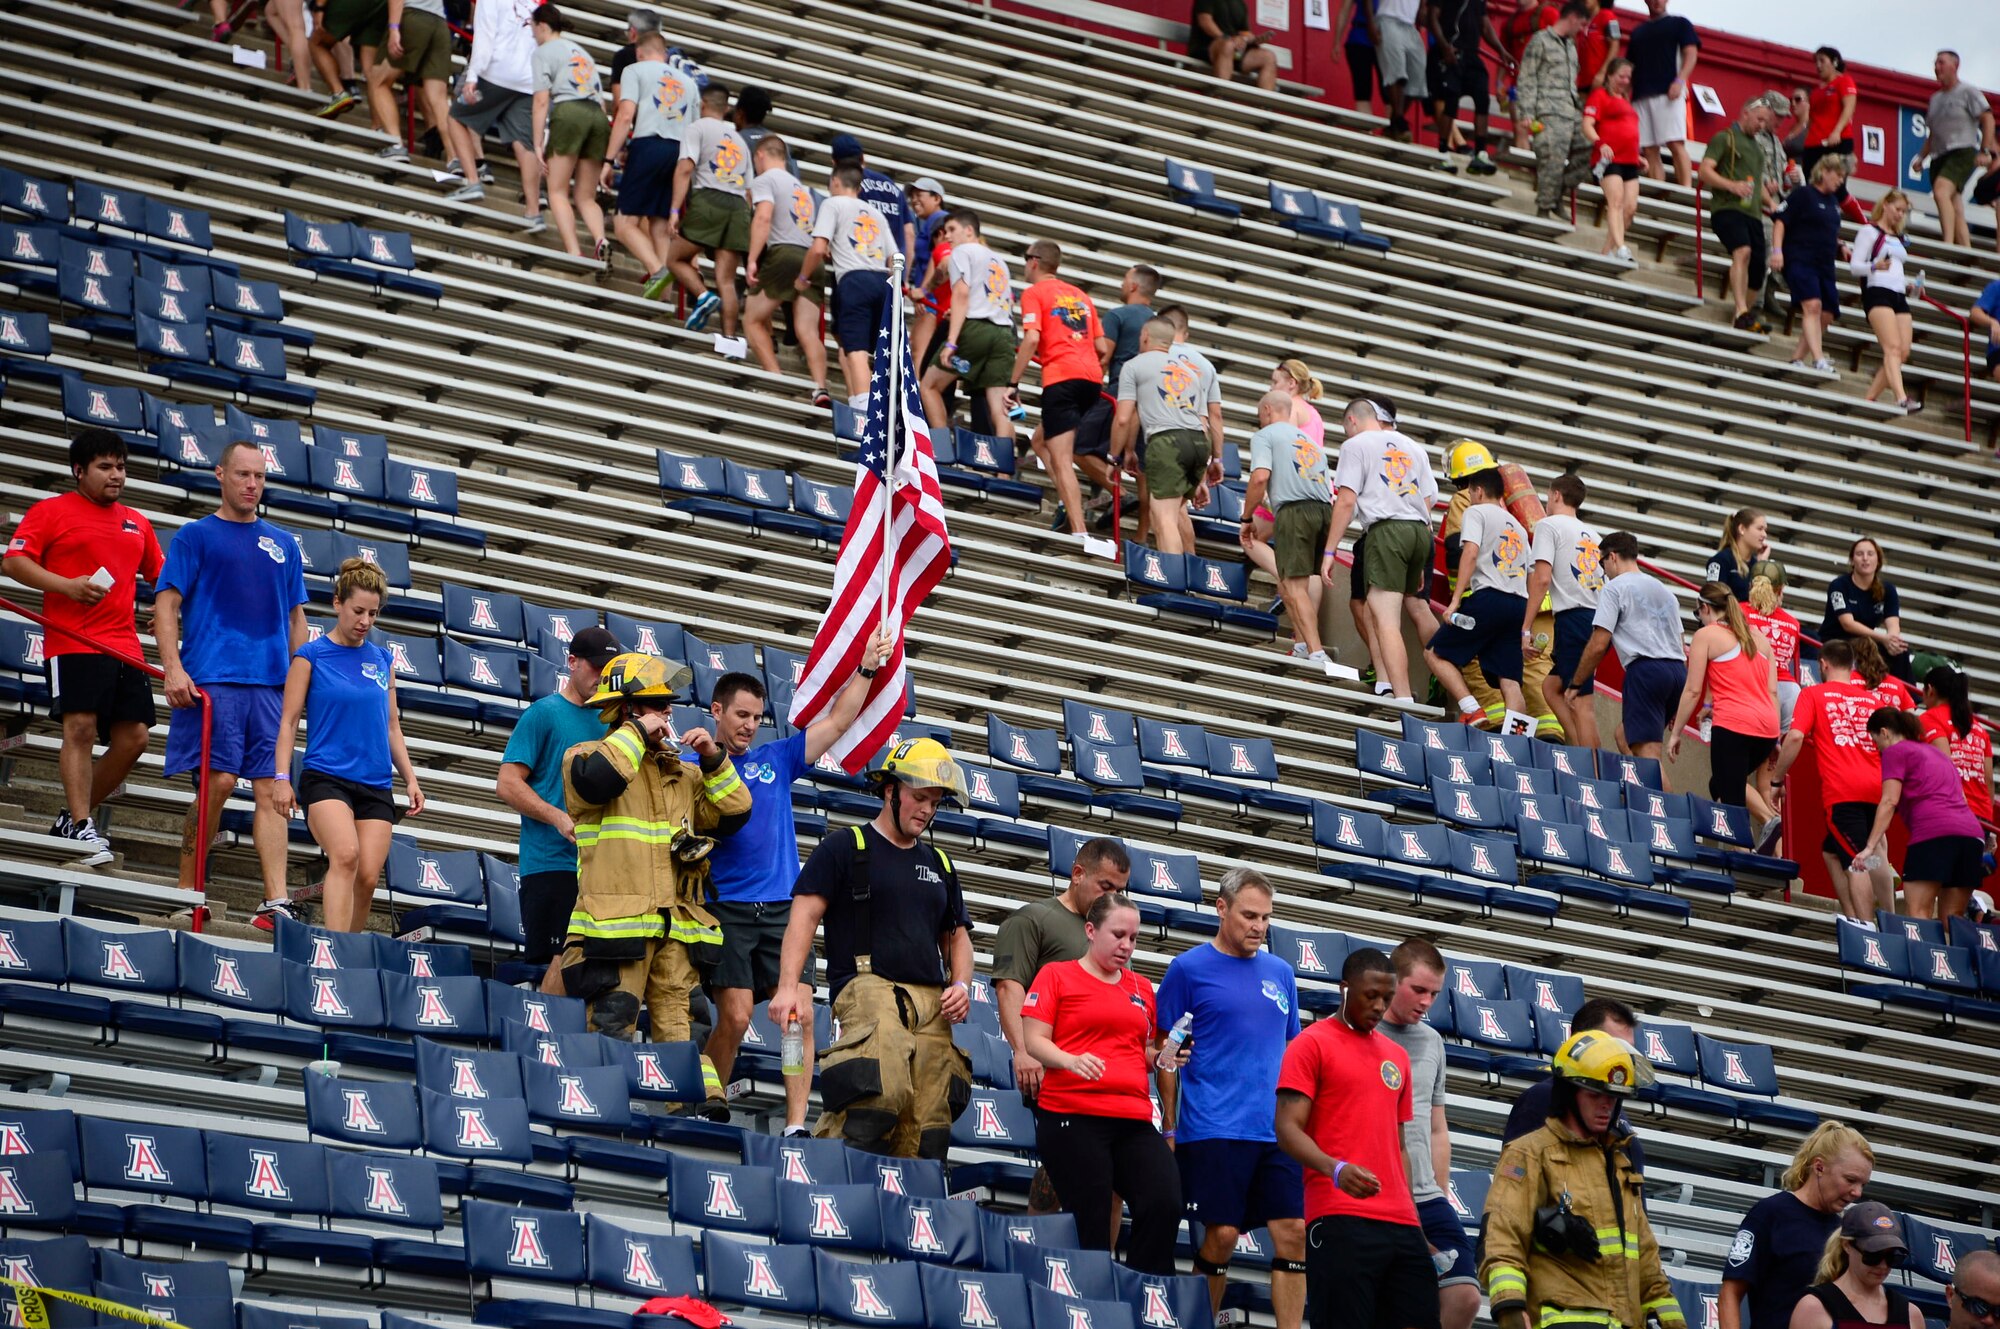 Capt. Brandon Liabenow, 12th Air Force (Air Forces Southern) executive officer, carries the U.S. flag during the 9/11 Tower Challenge at the University of Arizona football stadium in Tucson, Ariz., Sept. 11, 2015. The 9/11 Tower Challenge was held to honor those who lost their lives during the Sept. 11, 2001 attacks and to show their support first responders and military members who continue to protect the U.S. from foreign and domestic threats. During the 9/11 Tower Challenge, participants climbed 2,071 steps representing the number of steps that were in the Twin Towers. (U.S. Air Force Photo by Tech. Sgt. Heather R. Redman/Released)